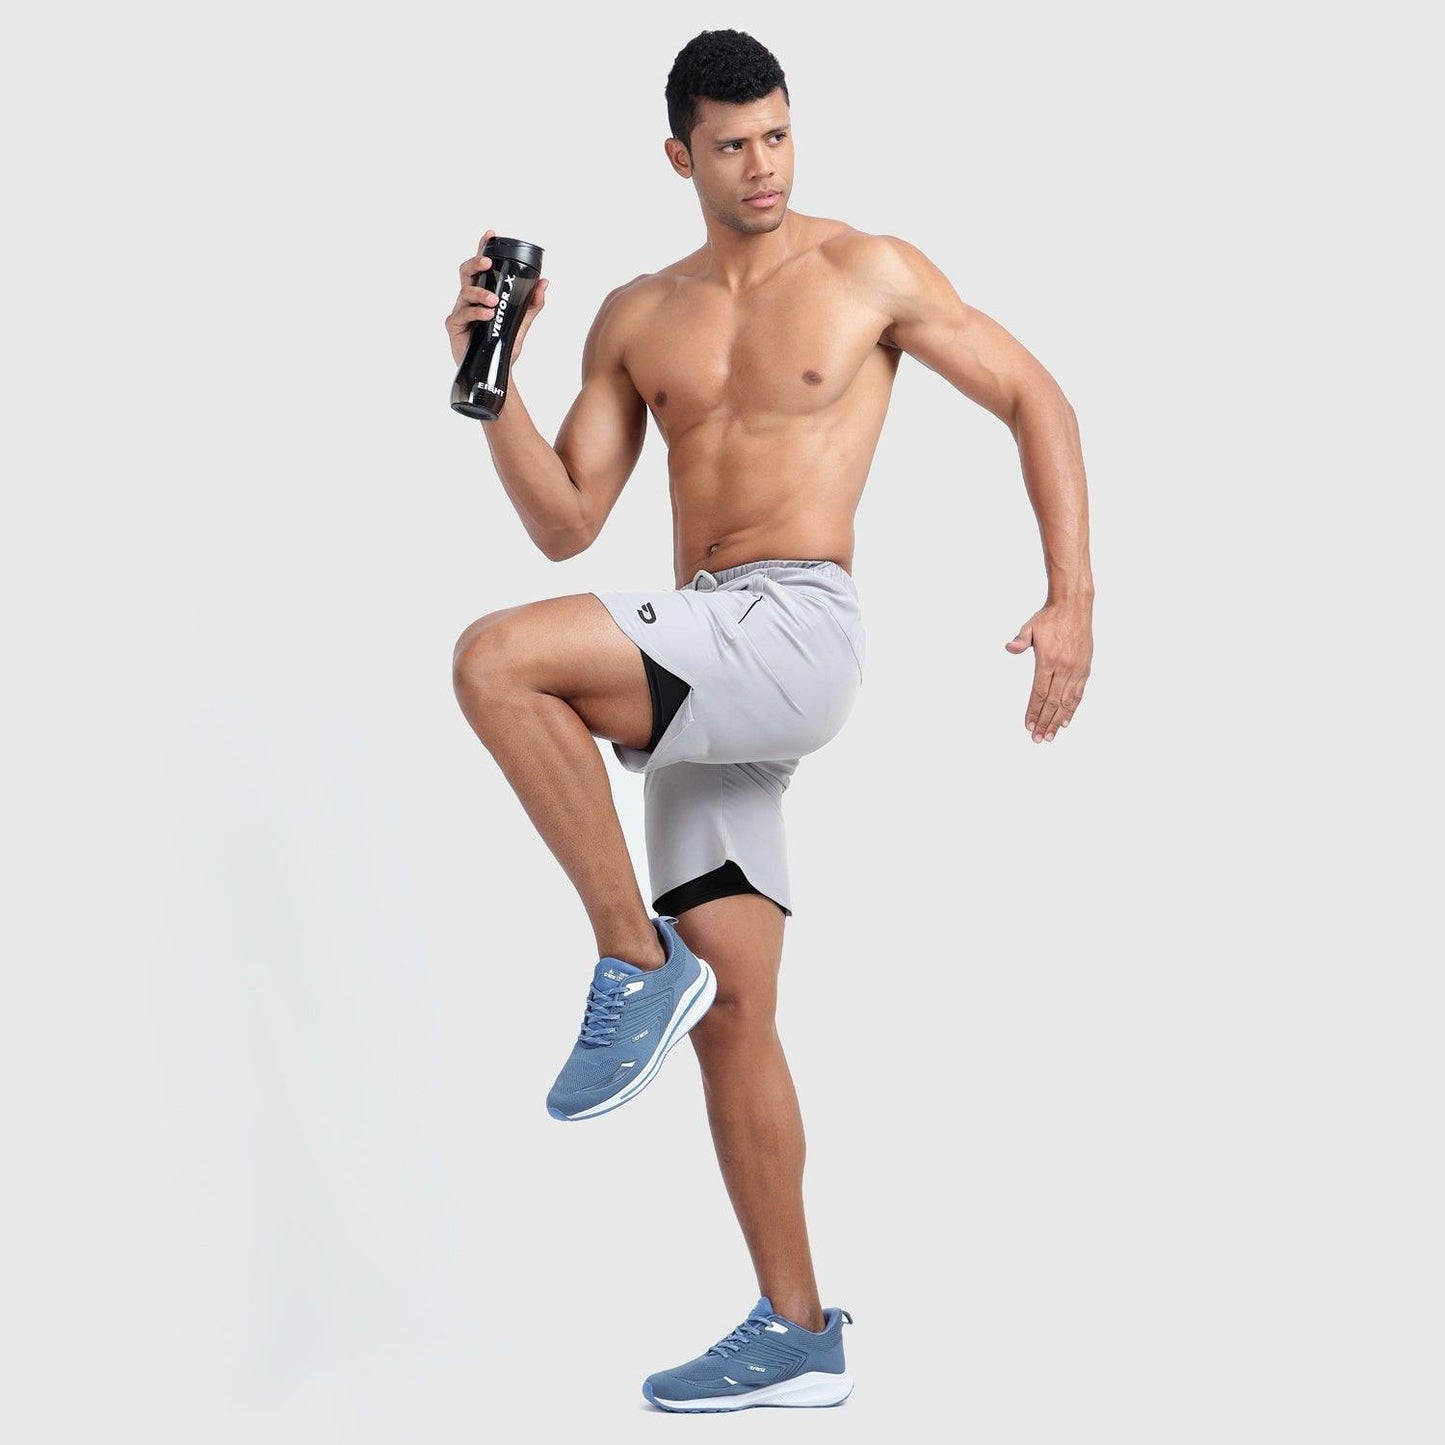 Denmonk's fashionable 2-IN-1 SHORTS light grey shorts for men will boost your level of gym fitness.